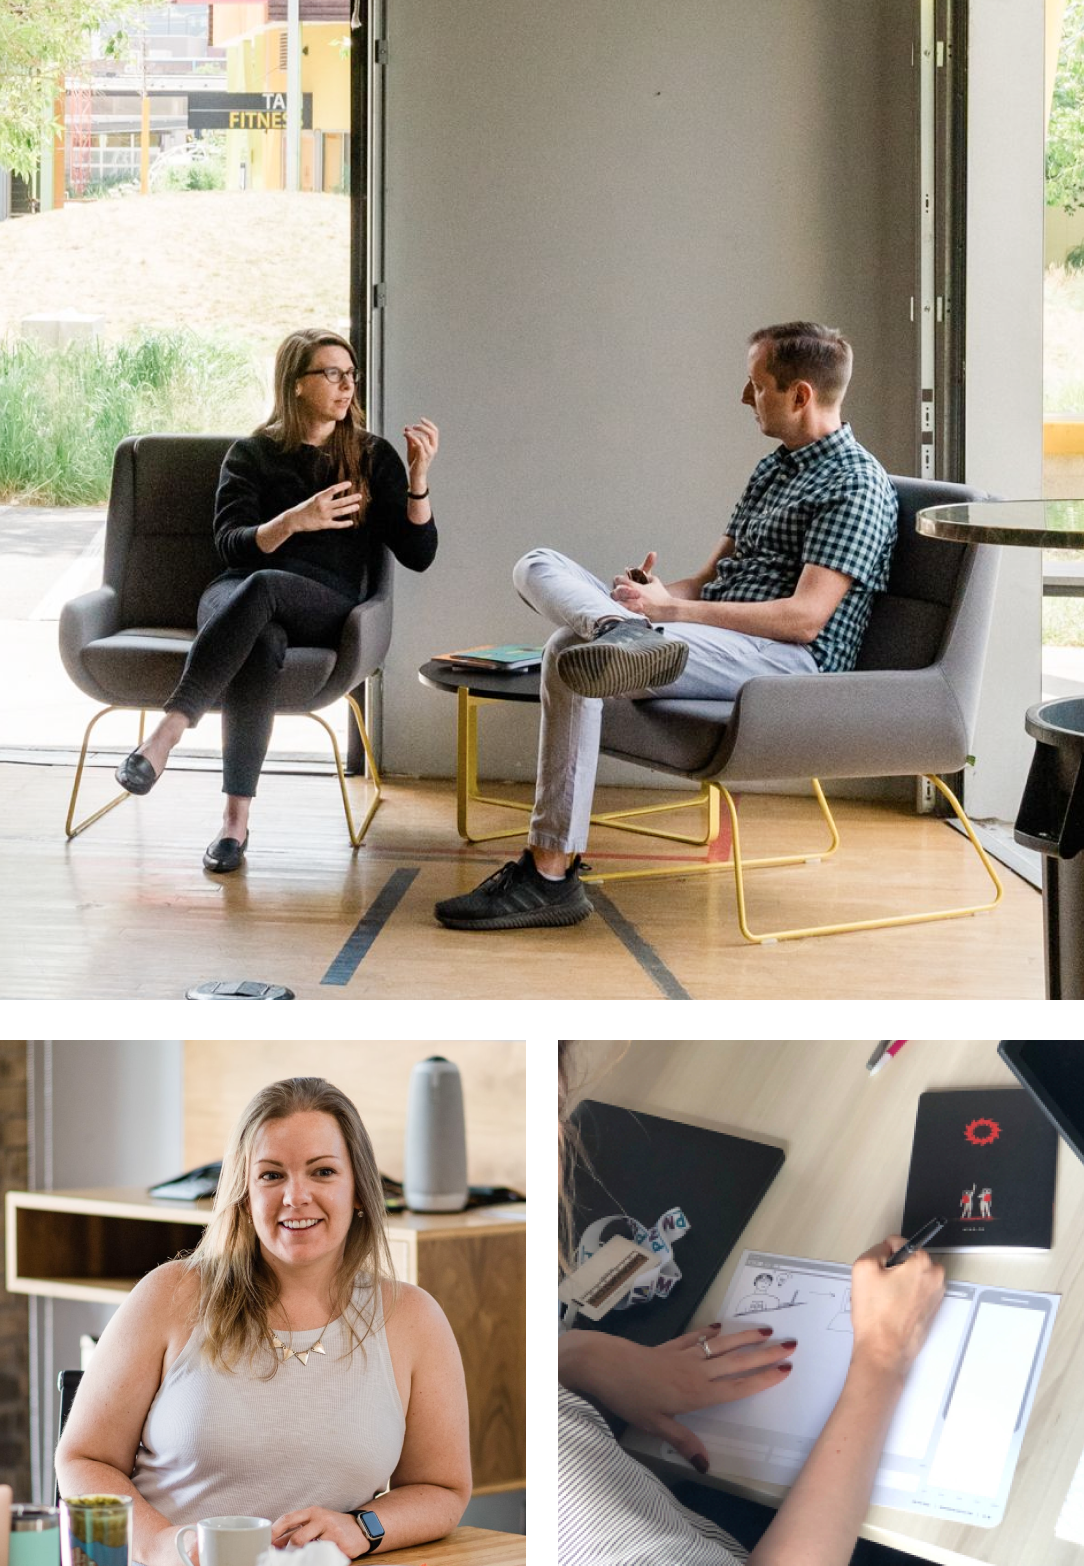 A collage of 3 photos. The first is of Aten's VP of Design, Ken Woodworth, and Senior UX/UI Designer, Kathryn Sutton, having a conversation in a coffee shop. The second is a portrait of Michaela Blackham – Aten's Accessibility and QA Specialist. The third is a close-up of a designer sketching ideas in one of Aten's sketchbooks.